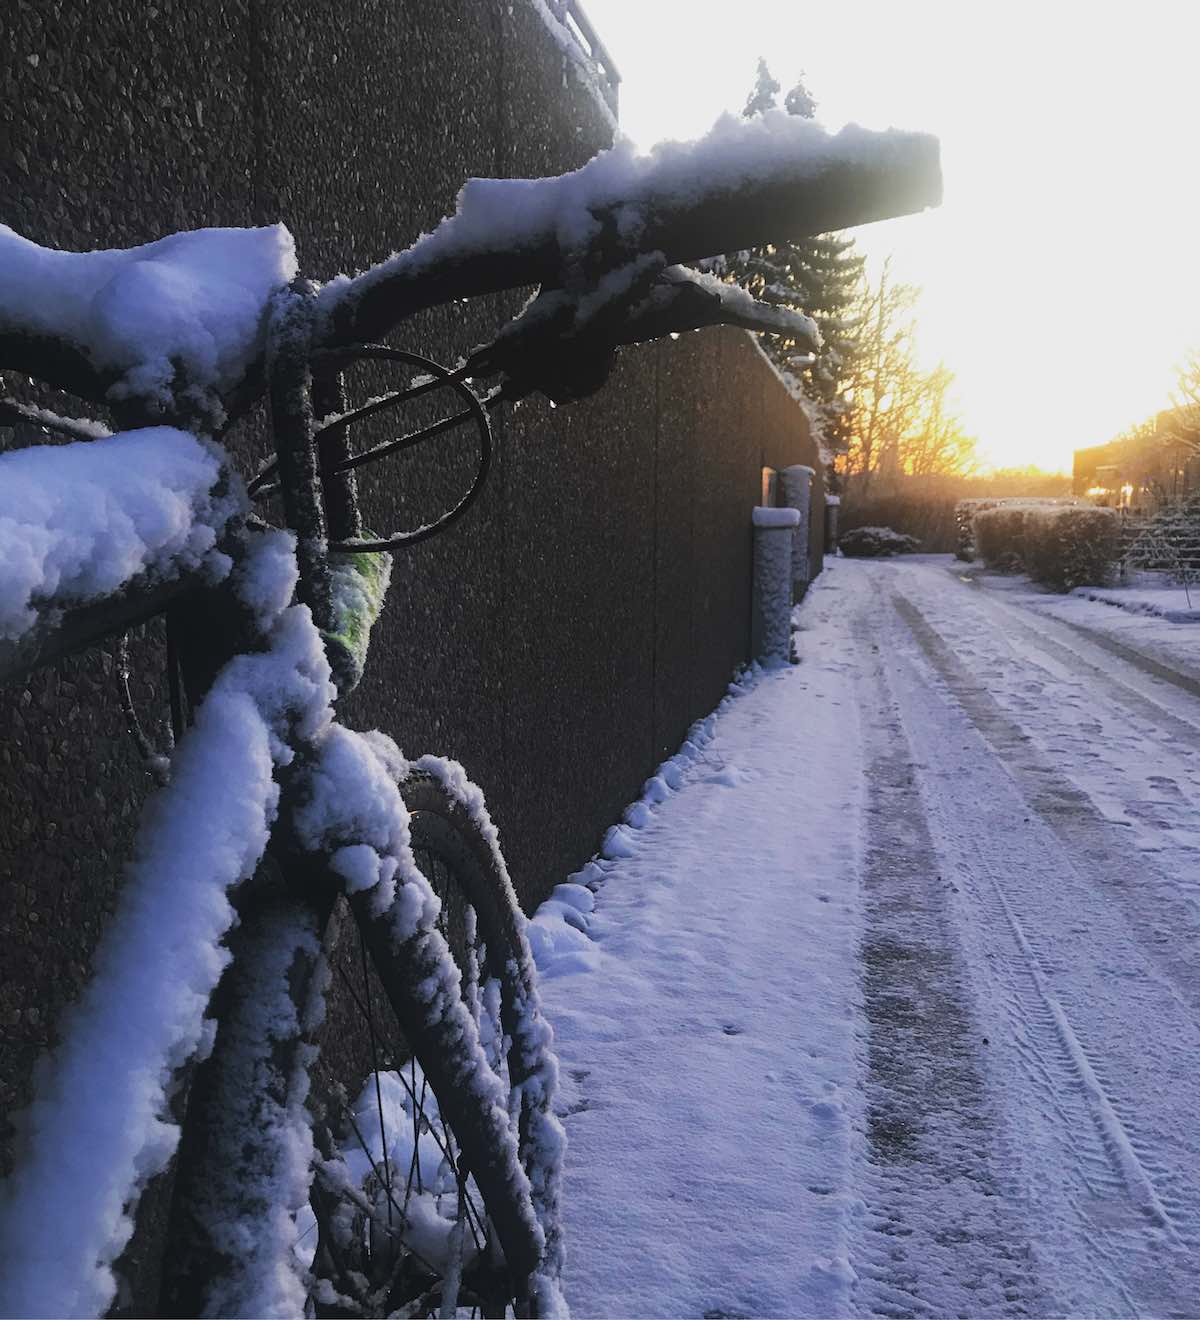 bikerumor pic of the day bicycle leaning against a wall with frost on it and snow on the road with the sun peaking out in the distance.